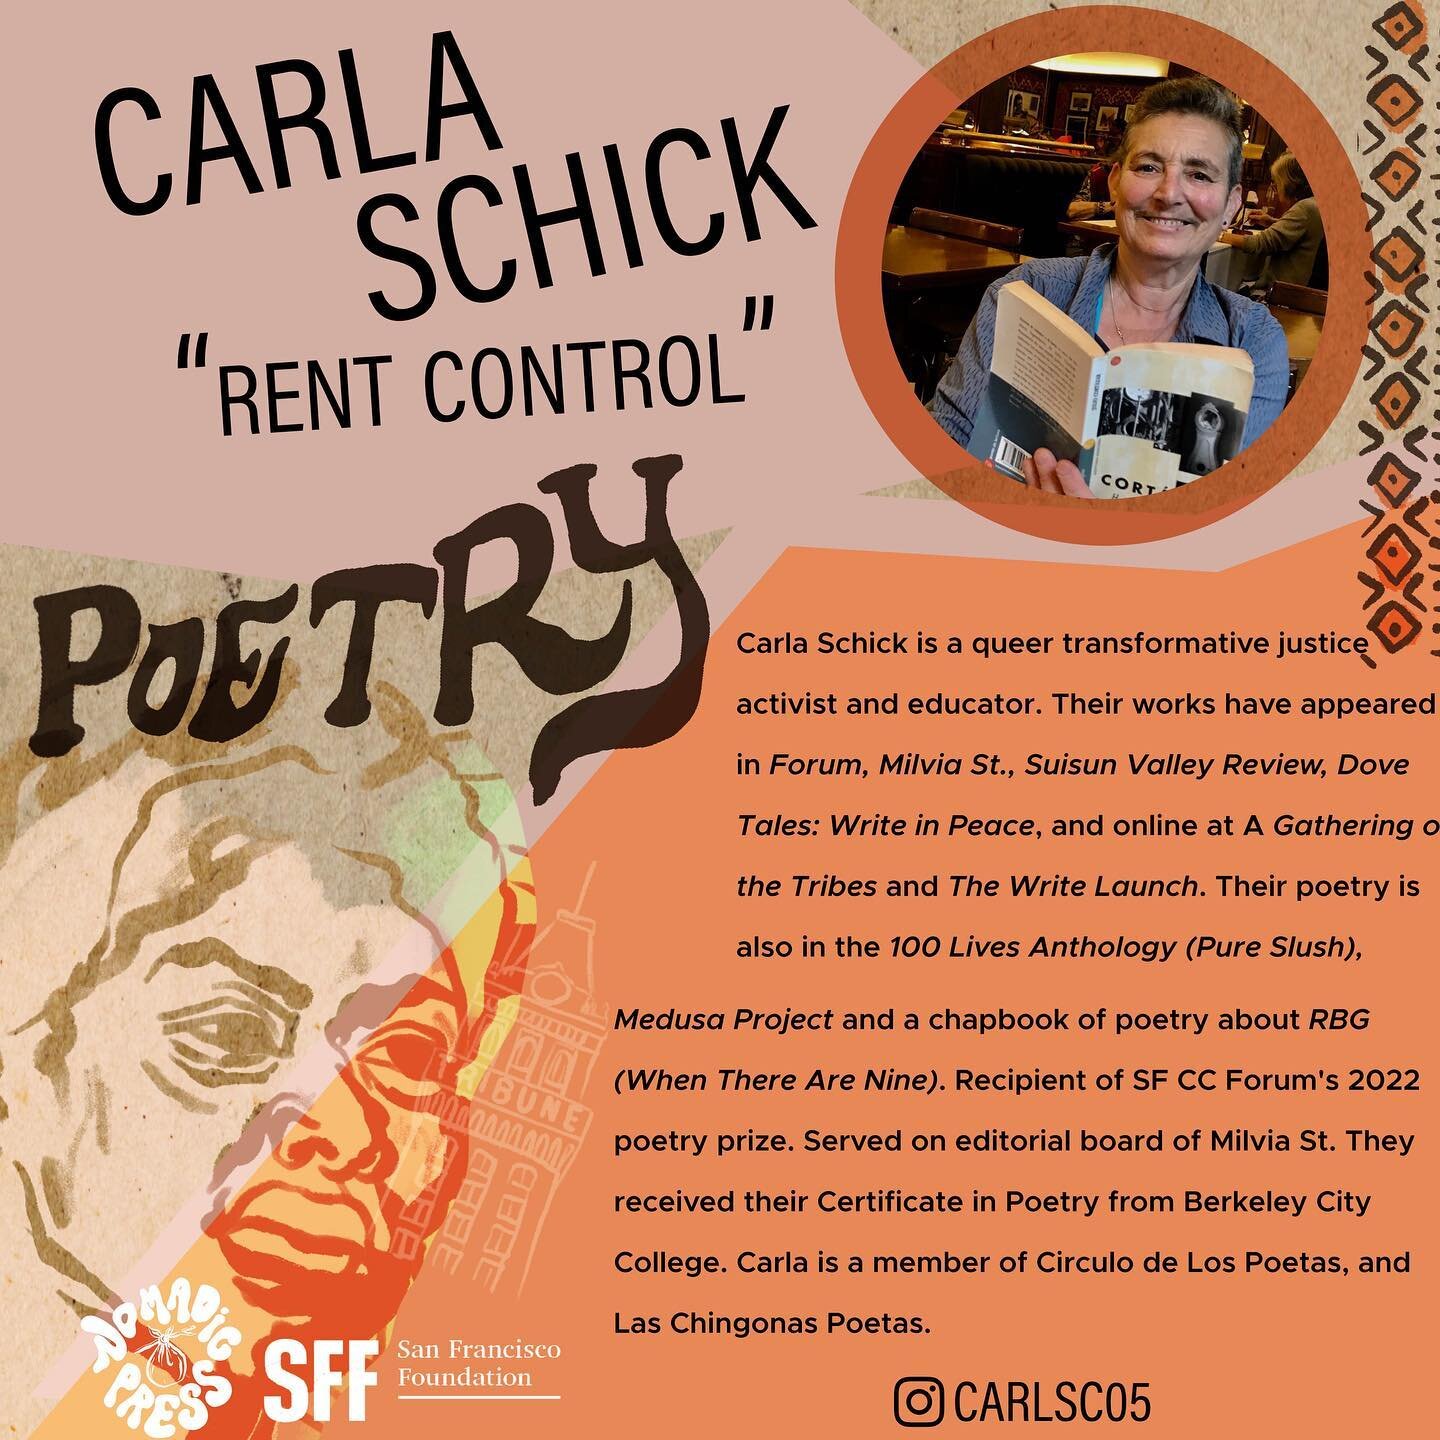 Join us in congratulating Carla Schick, recipient of the 2023 San Francisco Foundation/Nomadic Press Literary Award in Poetry! Carla has earned $5000 for their poem &ldquo;Rent Control&rdquo;. Comment with your congrats and give Carla (who is new to 